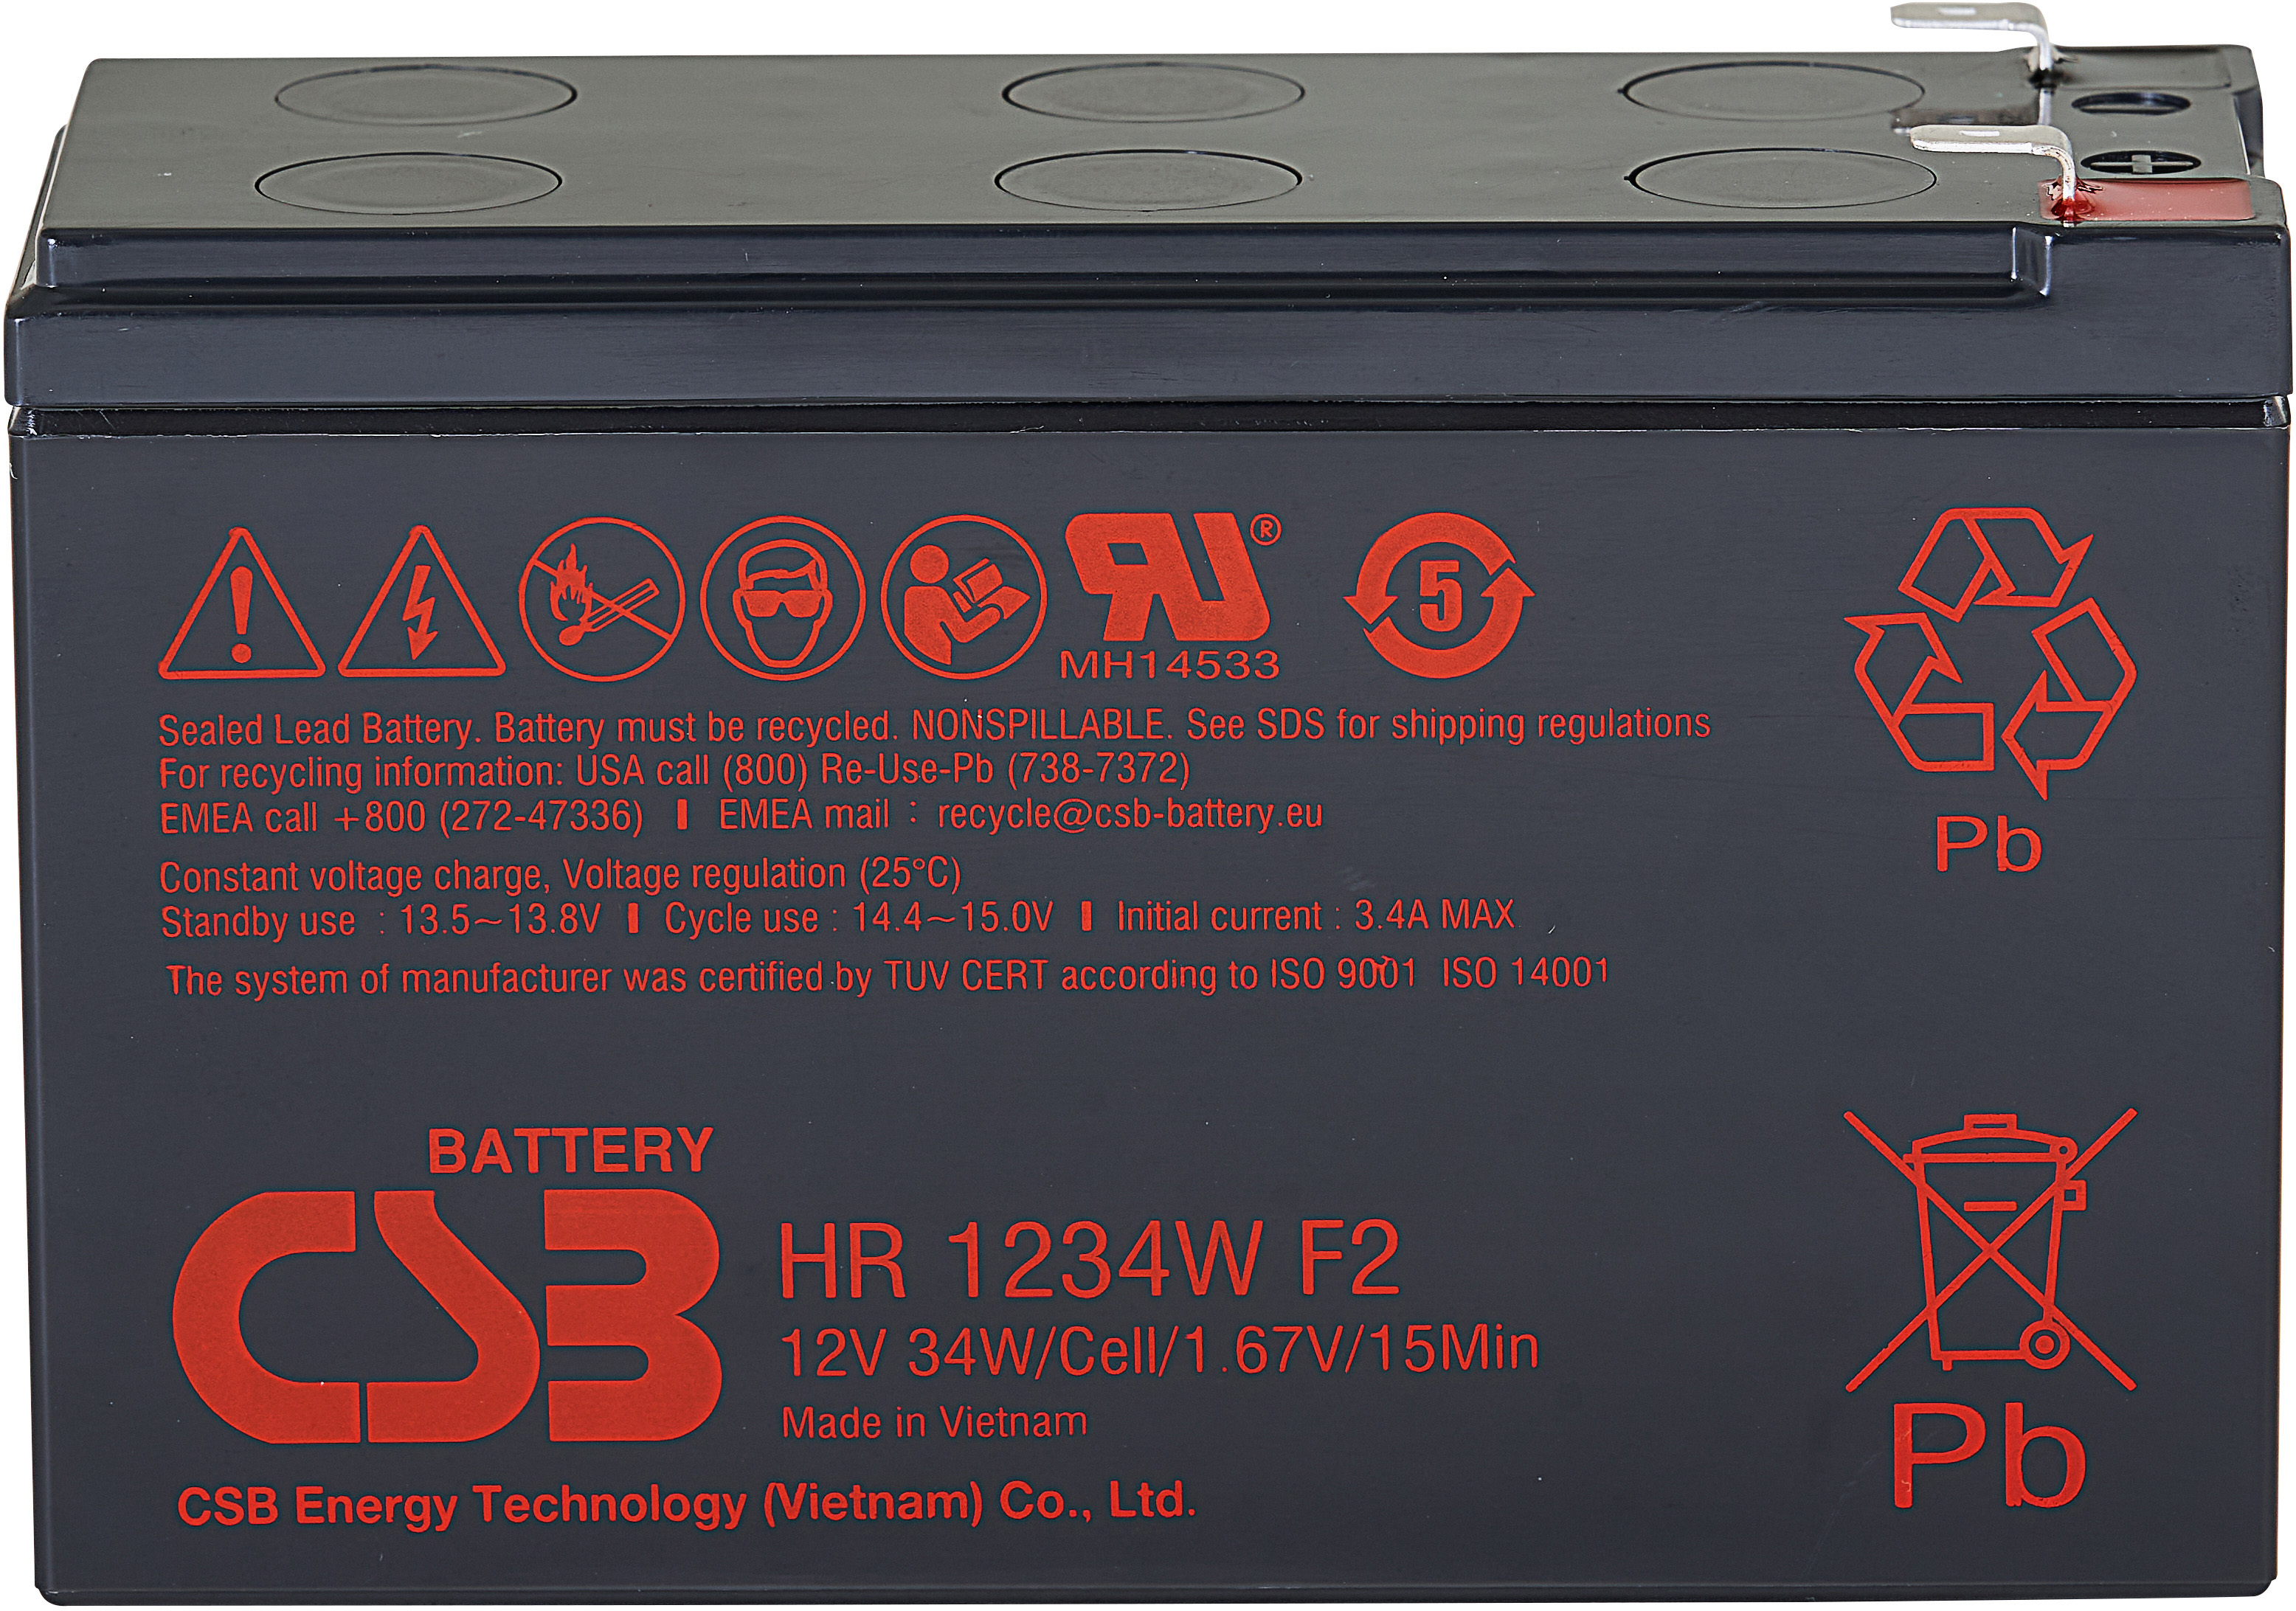 Battery CSB series GP, HR1234W F2, voltage 12V, capacity 34 W/C at 15 min. discharge to U fin. - 1.67 V/Cel at 25°C, (discharge 20 hours), max. discharge current (5 sec.) 130A, short circuit current 349A, max. charge current 3.4A, lead-acid type AGM, terminals F2, LxWxH 150.9x64.8x98.6mm., weight 2.5kg., service life 5 years.